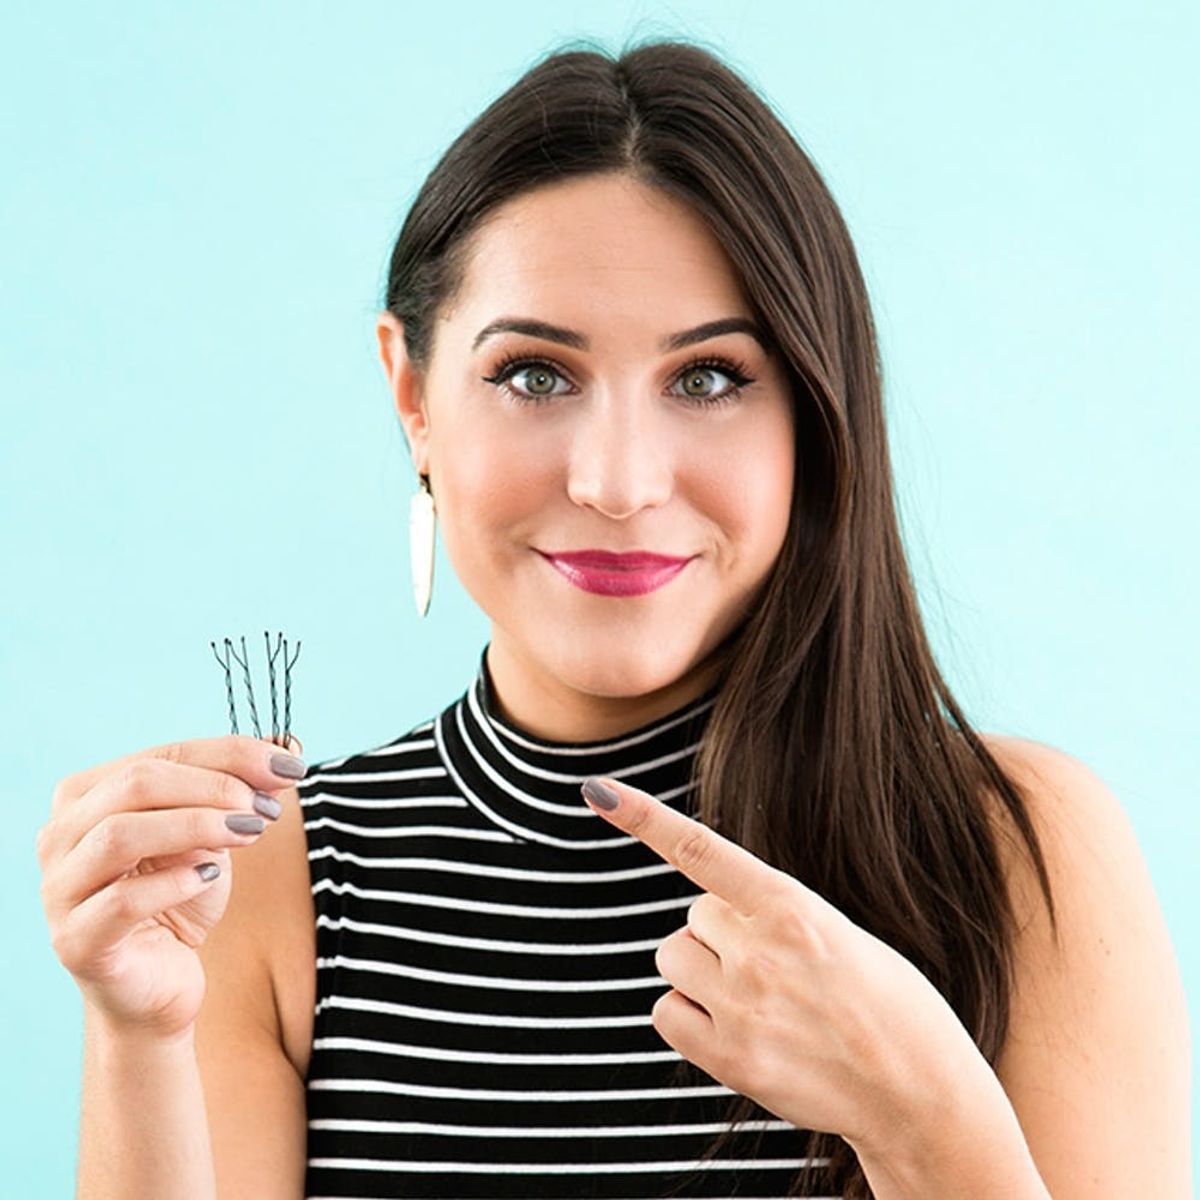 5 Clever Bobby Pin Hacks That Actually Work